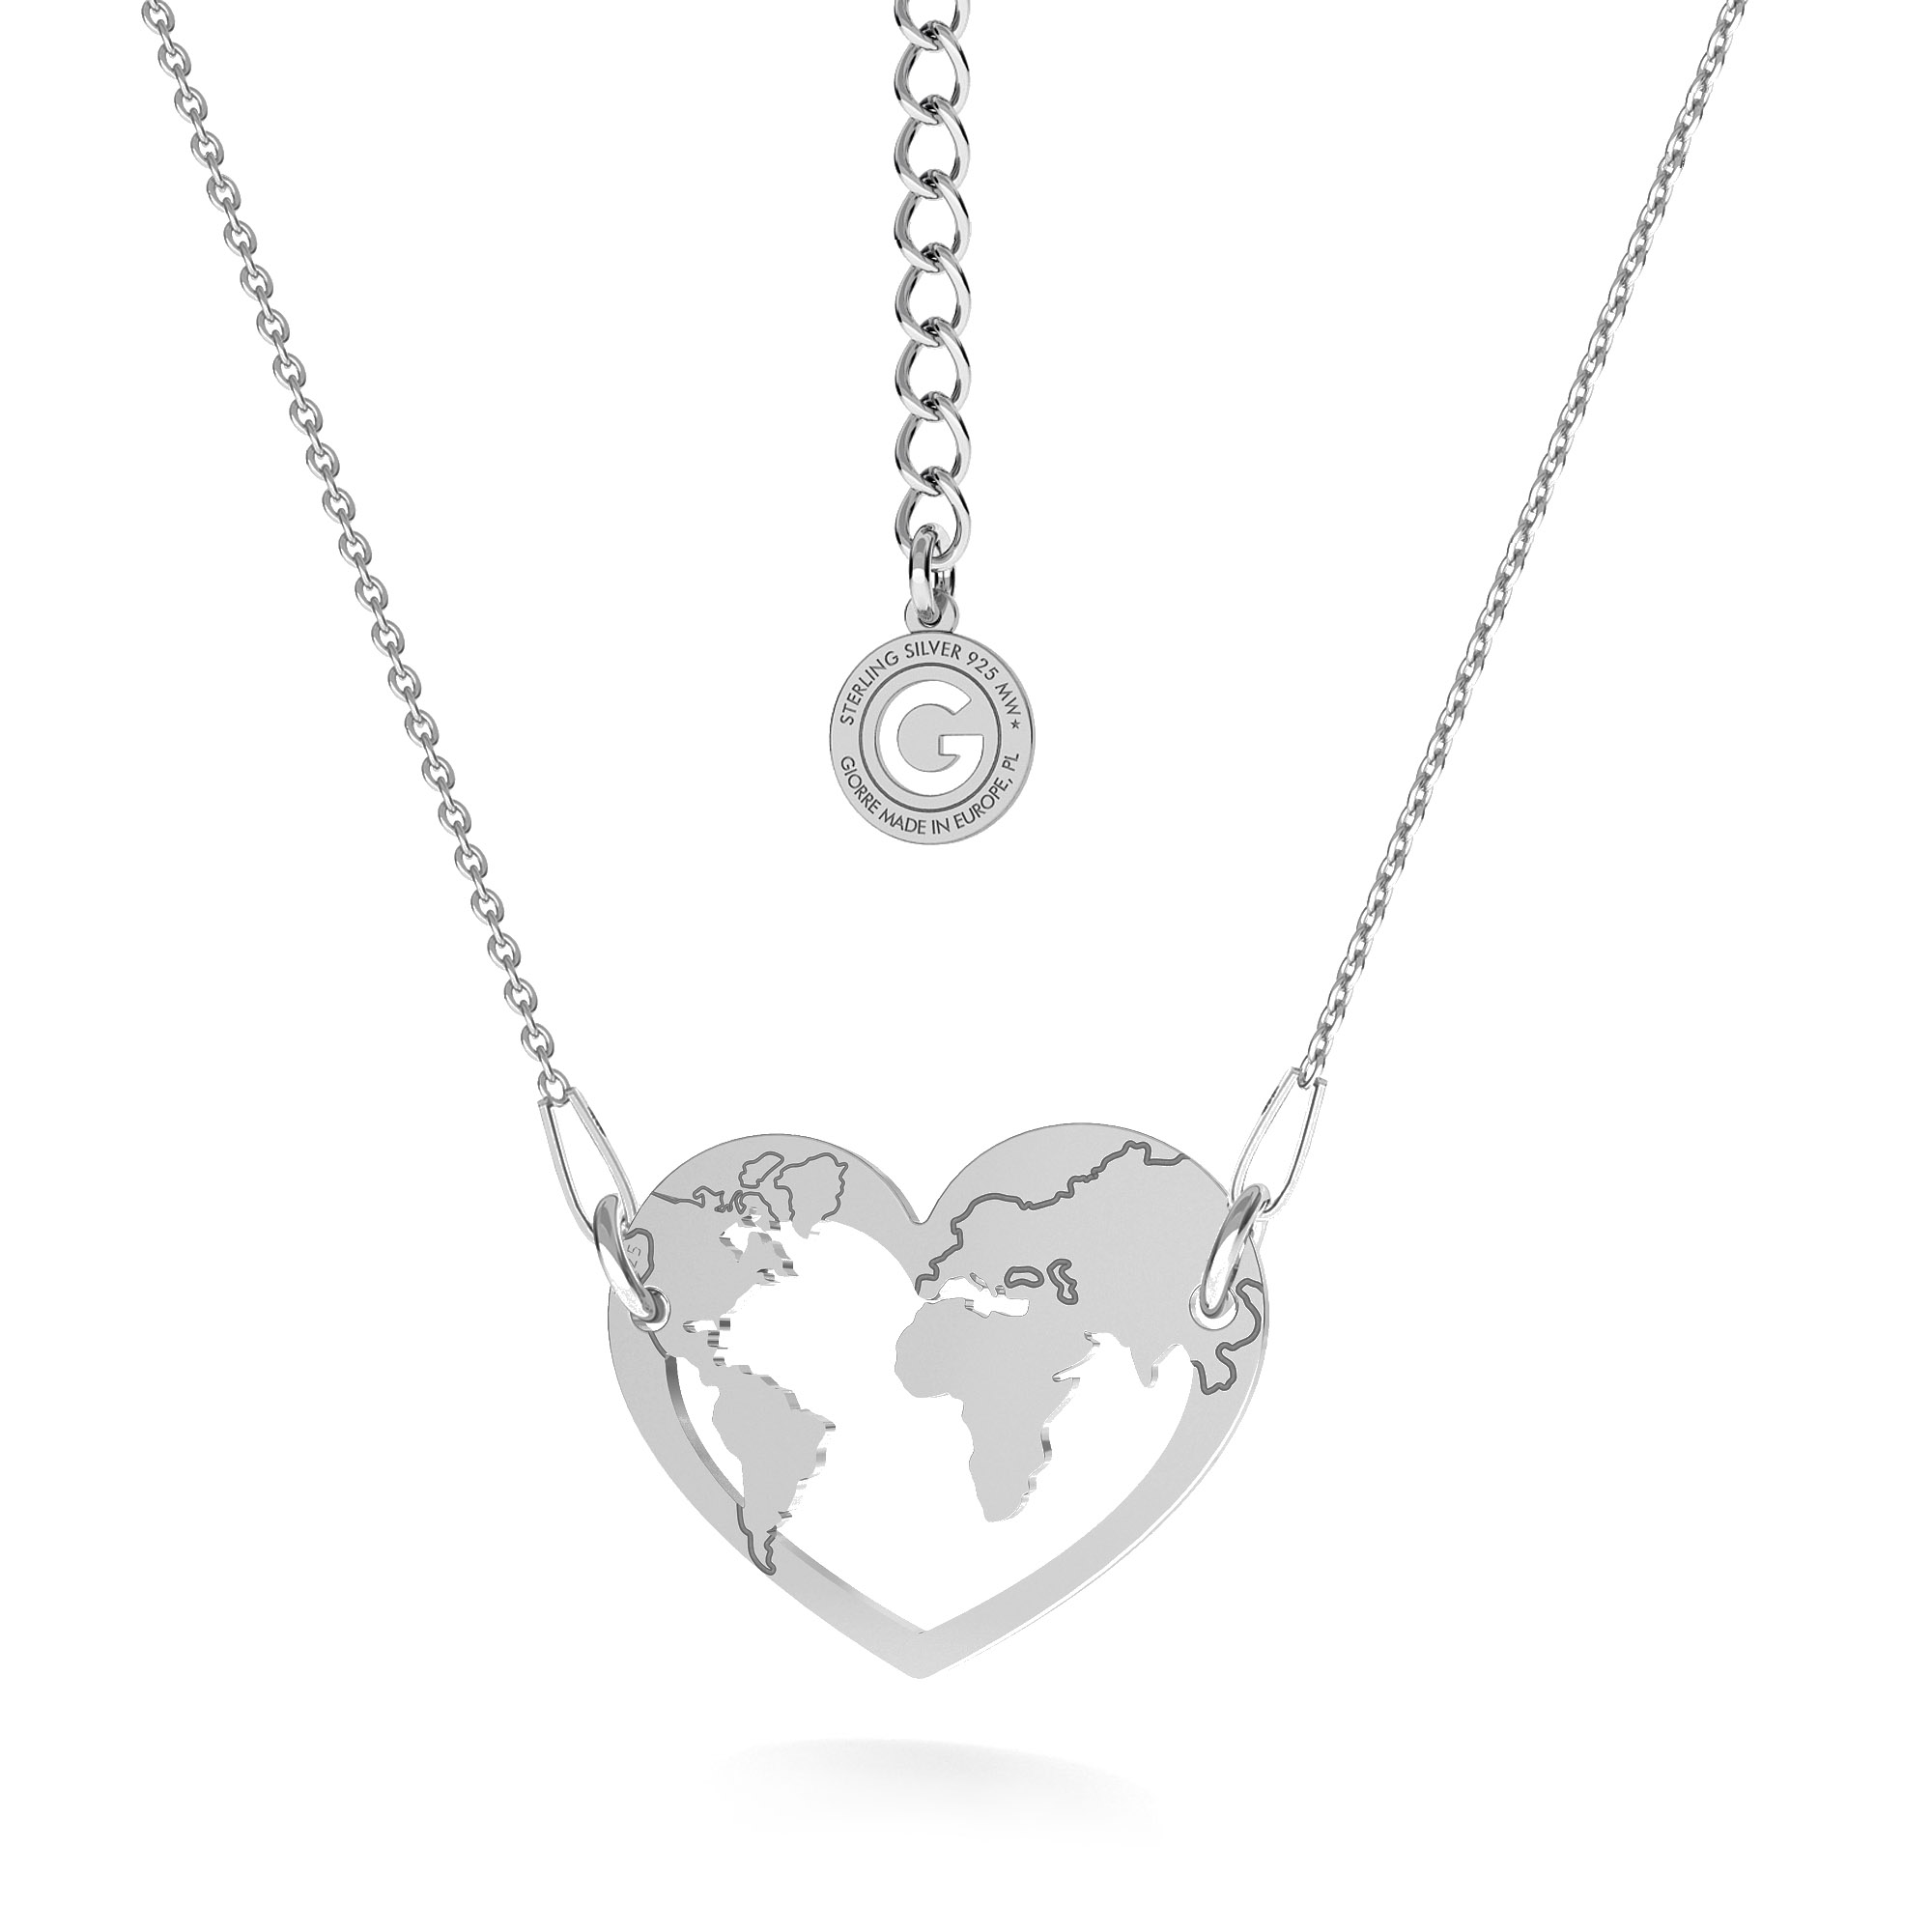 STERLING SILVER SUN NECKLACE 925